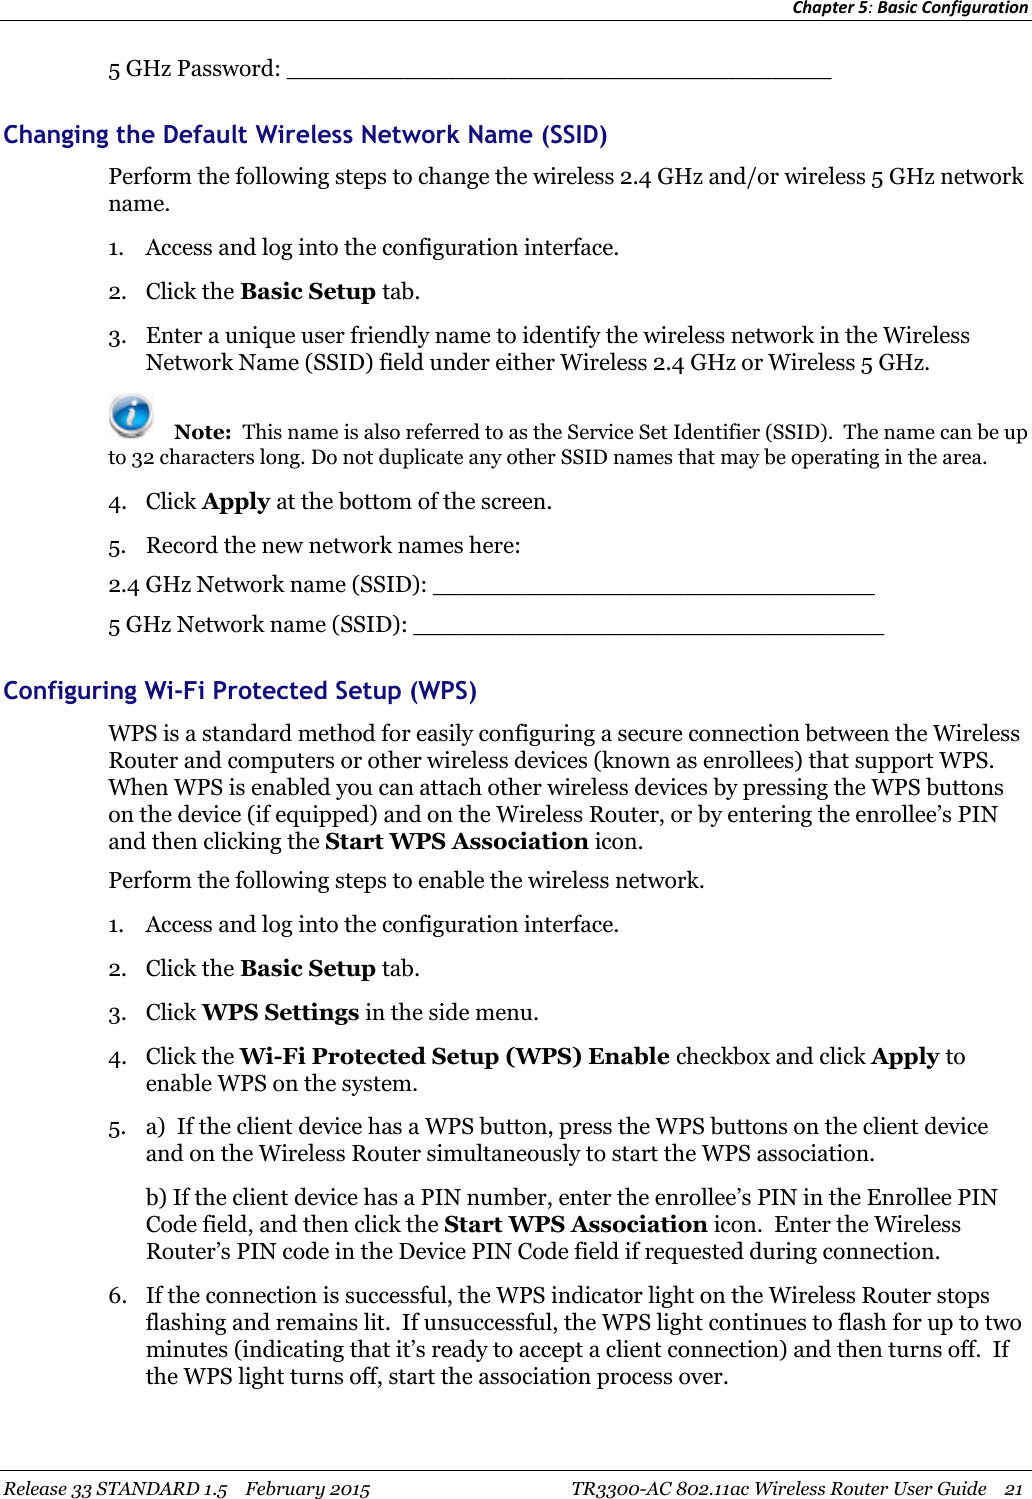 Chapter 5:Basic ConfigurationRelease 33 STANDARD 1.5 February 2015 TR3300-AC 802.11ac Wireless Router User Guide 215 GHz Password: _____________________________________Changing the Default Wireless Network Name (SSID)Perform the following steps to change the wireless 2.4 GHz and/or wireless 5 GHz networkname.1. Access and log into the configuration interface.2. Click the Basic Setup tab.3. Enter a unique user friendly name to identify the wireless network in the WirelessNetwork Name (SSID) field under either Wireless 2.4 GHz or Wireless 5 GHz.Note: This name is also referred to as the Service Set Identifier (SSID). The name can be upto 32 characters long. Do not duplicate any other SSID names that may be operating in the area.4. Click Apply at the bottom of the screen.5. Record the new network names here:2.4 GHz Network name (SSID): ______________________________5 GHz Network name (SSID): ________________________________Configuring Wi-Fi Protected Setup (WPS)WPS is a standard method for easily configuring a secure connection between the WirelessRouter and computers or other wireless devices (known as enrollees) that support WPS.When WPS is enabled you can attach other wireless devices by pressing the WPS buttonson the device (if equipped) and on the Wireless Router, or by entering the enrollee’s PINand then clicking the Start WPS Association icon.Perform the following steps to enable the wireless network.1. Access and log into the configuration interface.2. Click the Basic Setup tab.3. Click WPS Settings in the side menu.4. Click the Wi-Fi Protected Setup (WPS) Enable checkbox and click Apply toenable WPS on the system.5. a) If the client device has a WPS button, press the WPS buttons on the client deviceand on the Wireless Router simultaneously to start the WPS association.b) If the client device has a PIN number, enter the enrollee’s PIN in the Enrollee PINCode field, and then click the Start WPS Association icon. Enter the WirelessRouter’s PIN code in the Device PIN Code field if requested during connection.6. If the connection is successful, the WPS indicator light on the Wireless Router stopsflashing and remains lit. If unsuccessful, the WPS light continues to flash for up to twominutes (indicating that it’s ready to accept a client connection) and then turns off. Ifthe WPS light turns off, start the association process over.